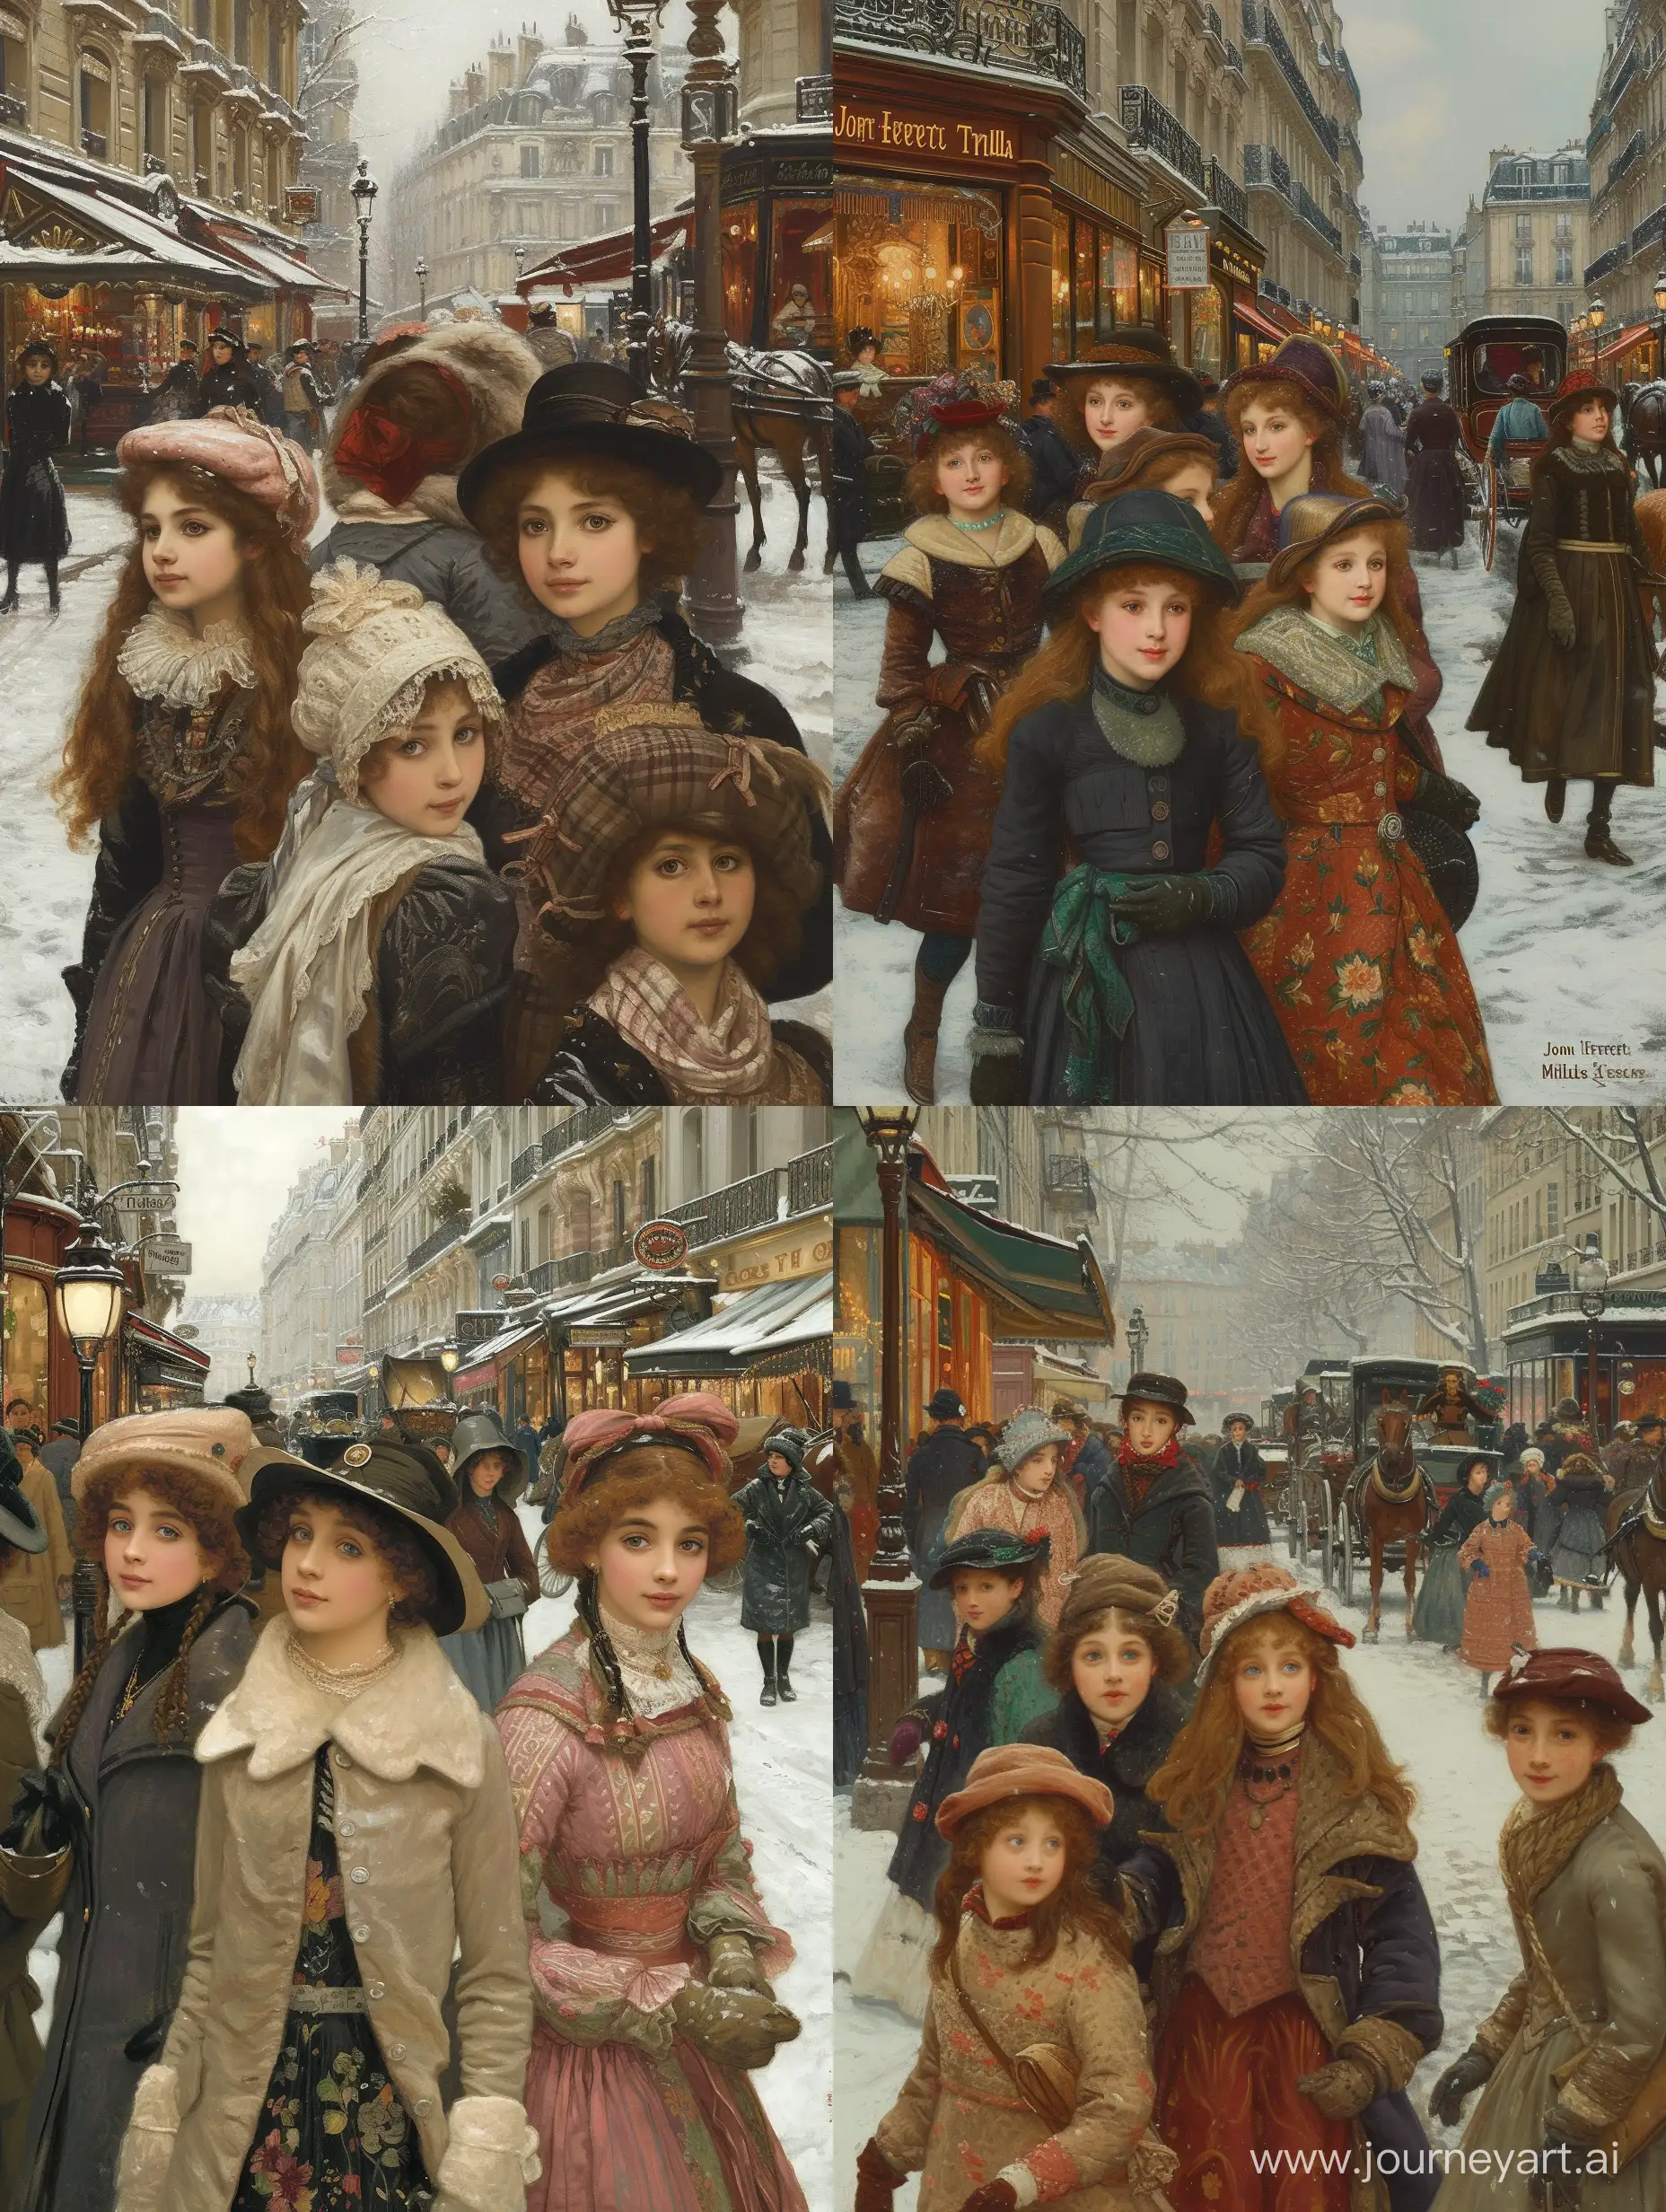 Subject: The central theme of the image is a winter scene in Paris in 1910, capturing the essence of a busy street. The focus is on a group of elegant girls, highlighting the fashion and lifestyle of the time. The artist, John Everett Millais, skillfully brings the historic setting to life through his oil painting. Setting: The background features a bustling street in Paris during winter, creating a lively atmosphere with people engaging in various activities. The winter setting adds a charming touch, with perhaps snow-covered streets and vintage architecture. Style/Coloring: Millais employs the classic style of oil painting, using rich and warm colors to evoke the ambiance of the early 20th century. The winter palette may include cool tones like blues and grays, contrasting with the vibrant colors of the girls' clothing. Action: The girls are depicted engaging in daily life activities, suggesting movement and vivacity. Millais captures the dynamic energy of the busy street, enhancing the narrative of the era. Items/Costume: The girls are likely adorned in fashionable clothing of the time, showcasing the trends and styles prevalent in 1910 Paris. The painting may feature accessories such as hats, gloves, and other period-specific items. Appearance: The characters' appearances are refined and sophisticated, reflecting the societal norms and fashion of the early 20th century. Millais pays attention to detail, emphasizing the unique facial expressions and features of each individual. Accessories: The accessories in the painting, such as street lamps, horse-drawn carriages, and storefronts, contribute to the historical context. These details add depth and authenticity to the overall composition.